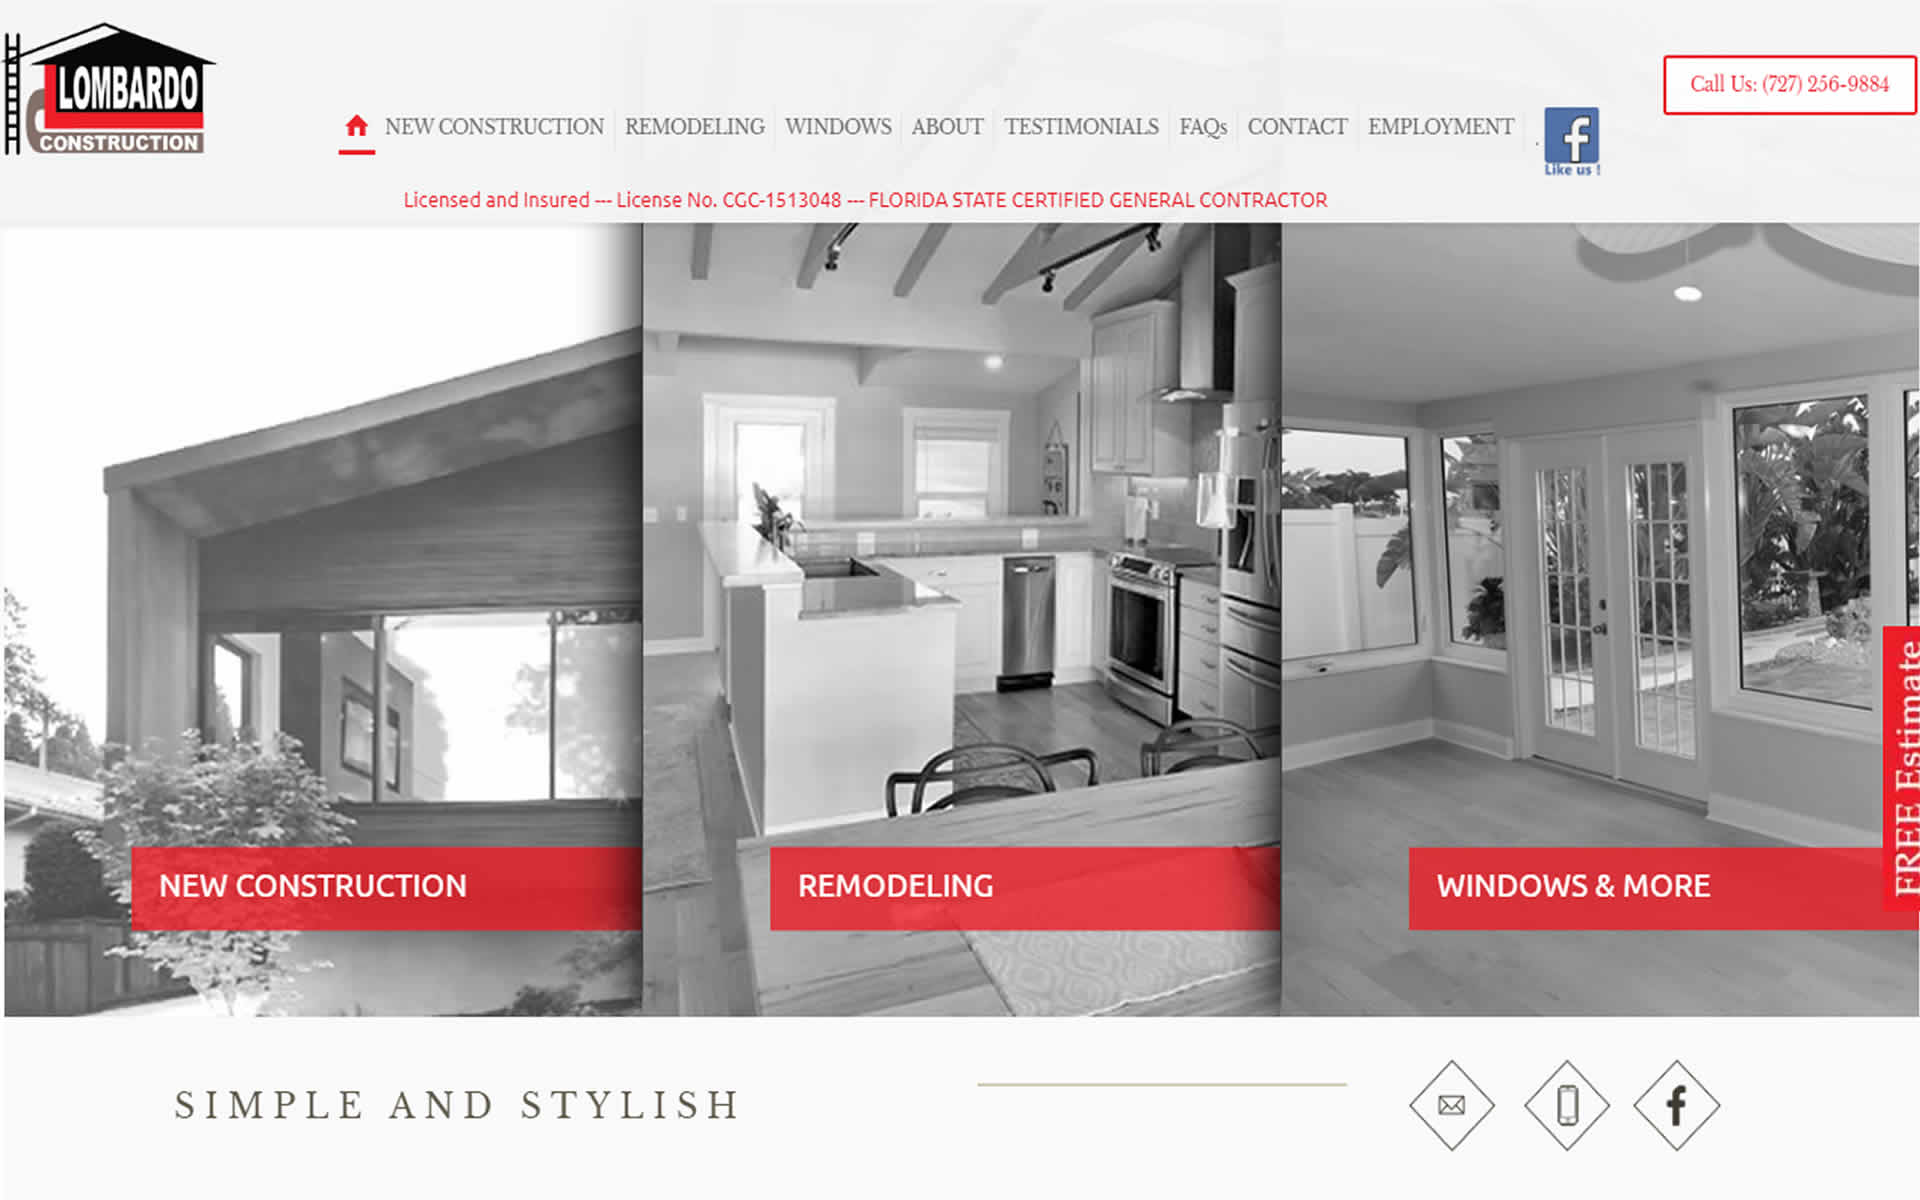 Lombardo Construction & Remodeling